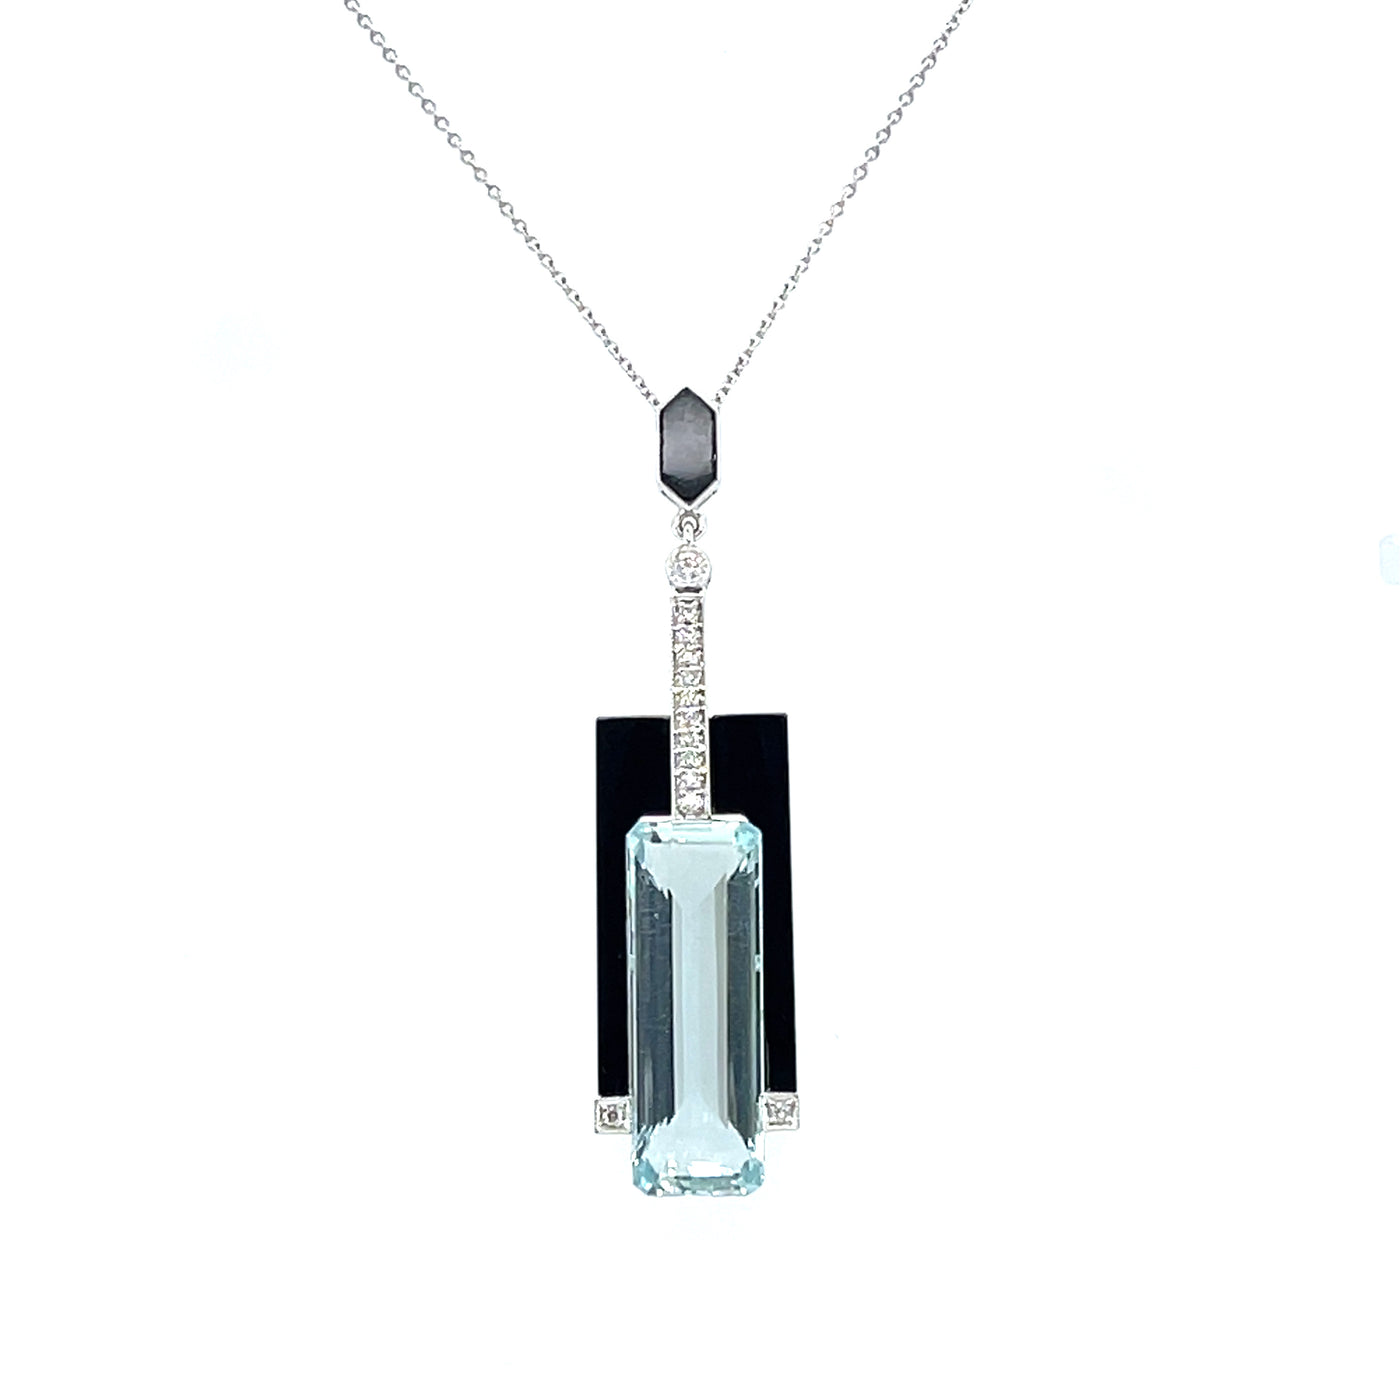 18CT white gold Aquamarine and Onyx pendant and necklace